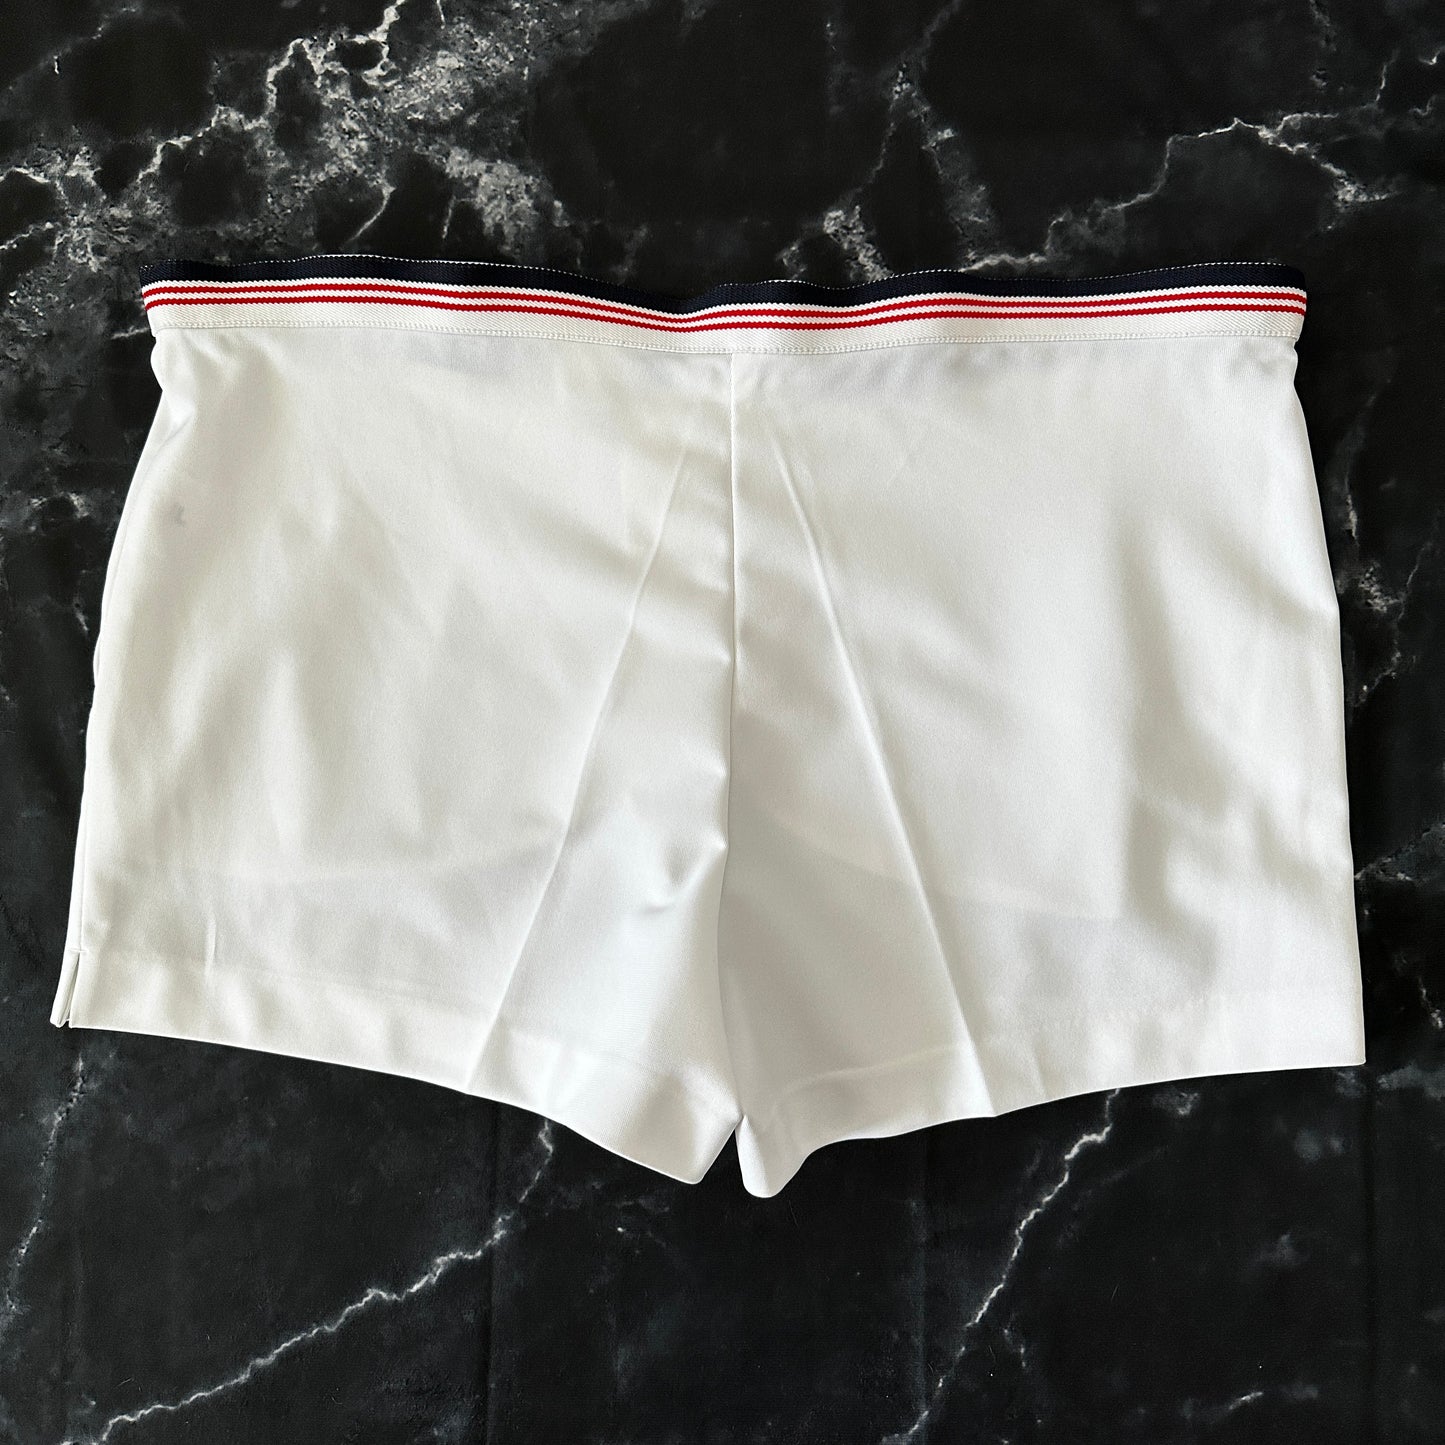 Fila Vintage 80s Tennis Shorts - White - 54 / XL - Made in Italy